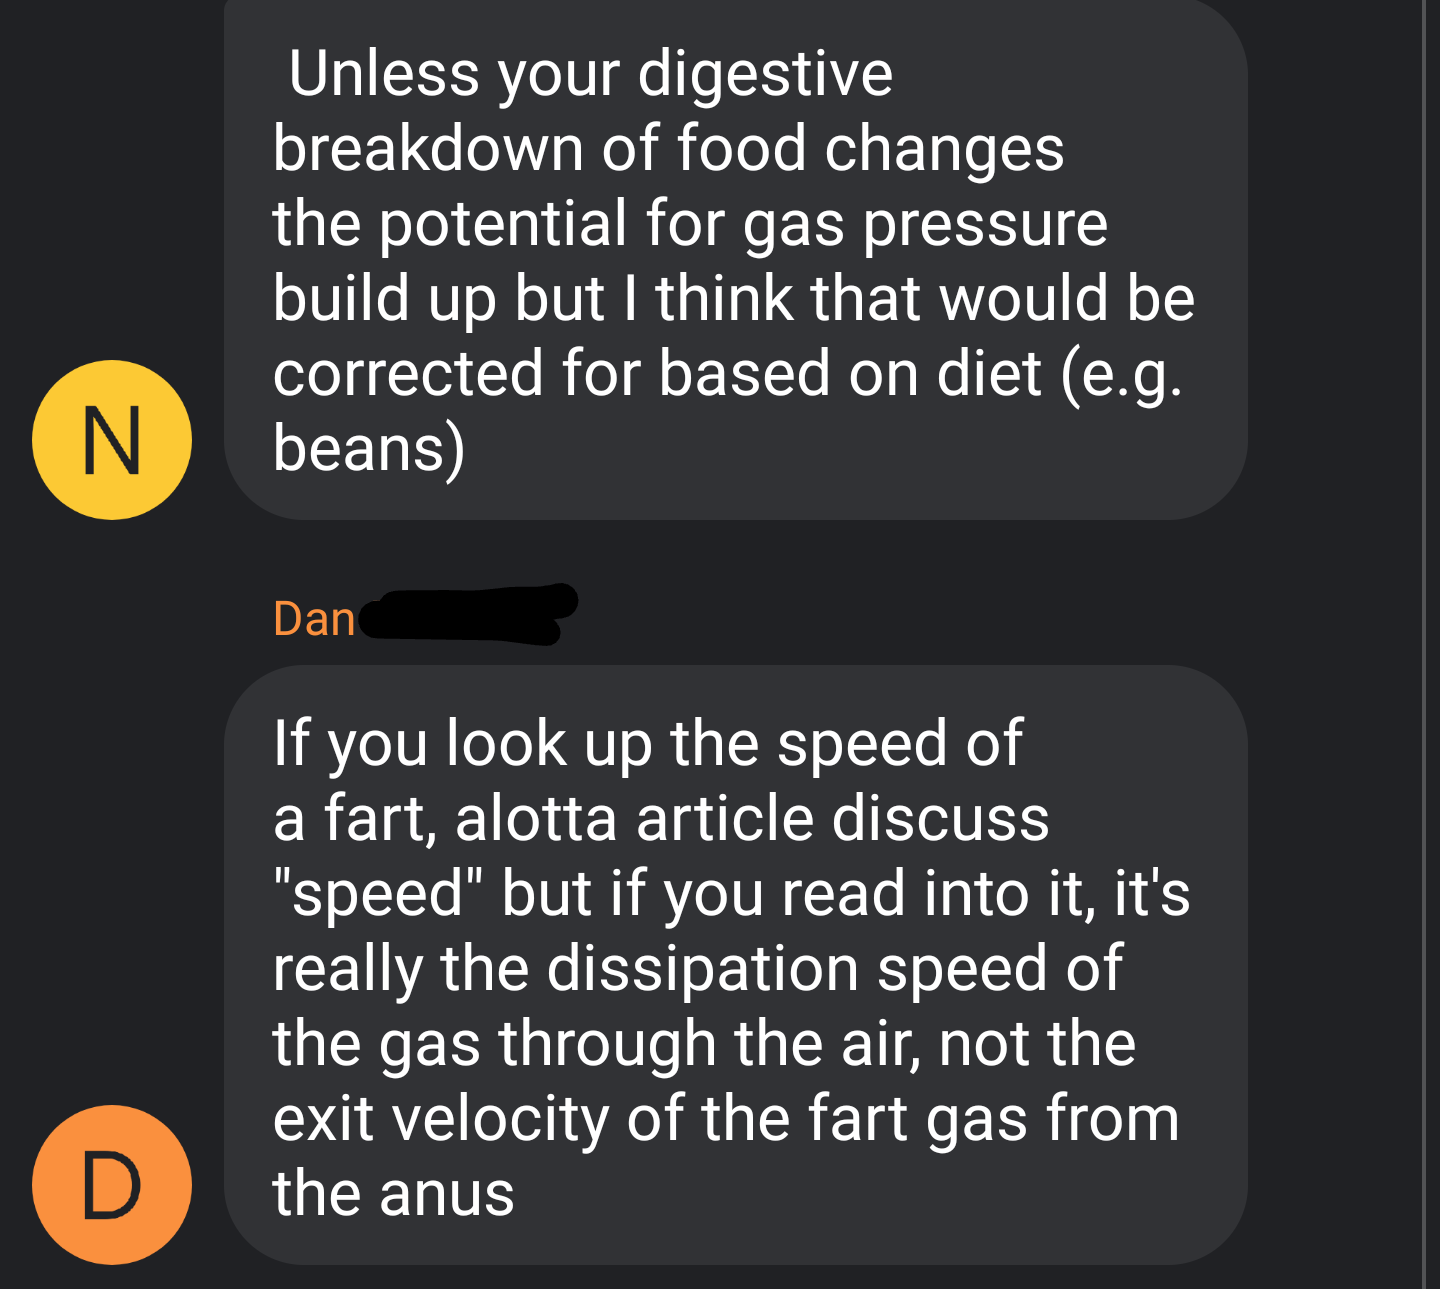 memory quotes - Unless your digestive breakdown of food changes the potential for gas pressure build up but I think that would be corrected for based on diet e.g. beans Dan If you look up the speed of a fart, alotta article discuss "speed" but if you read